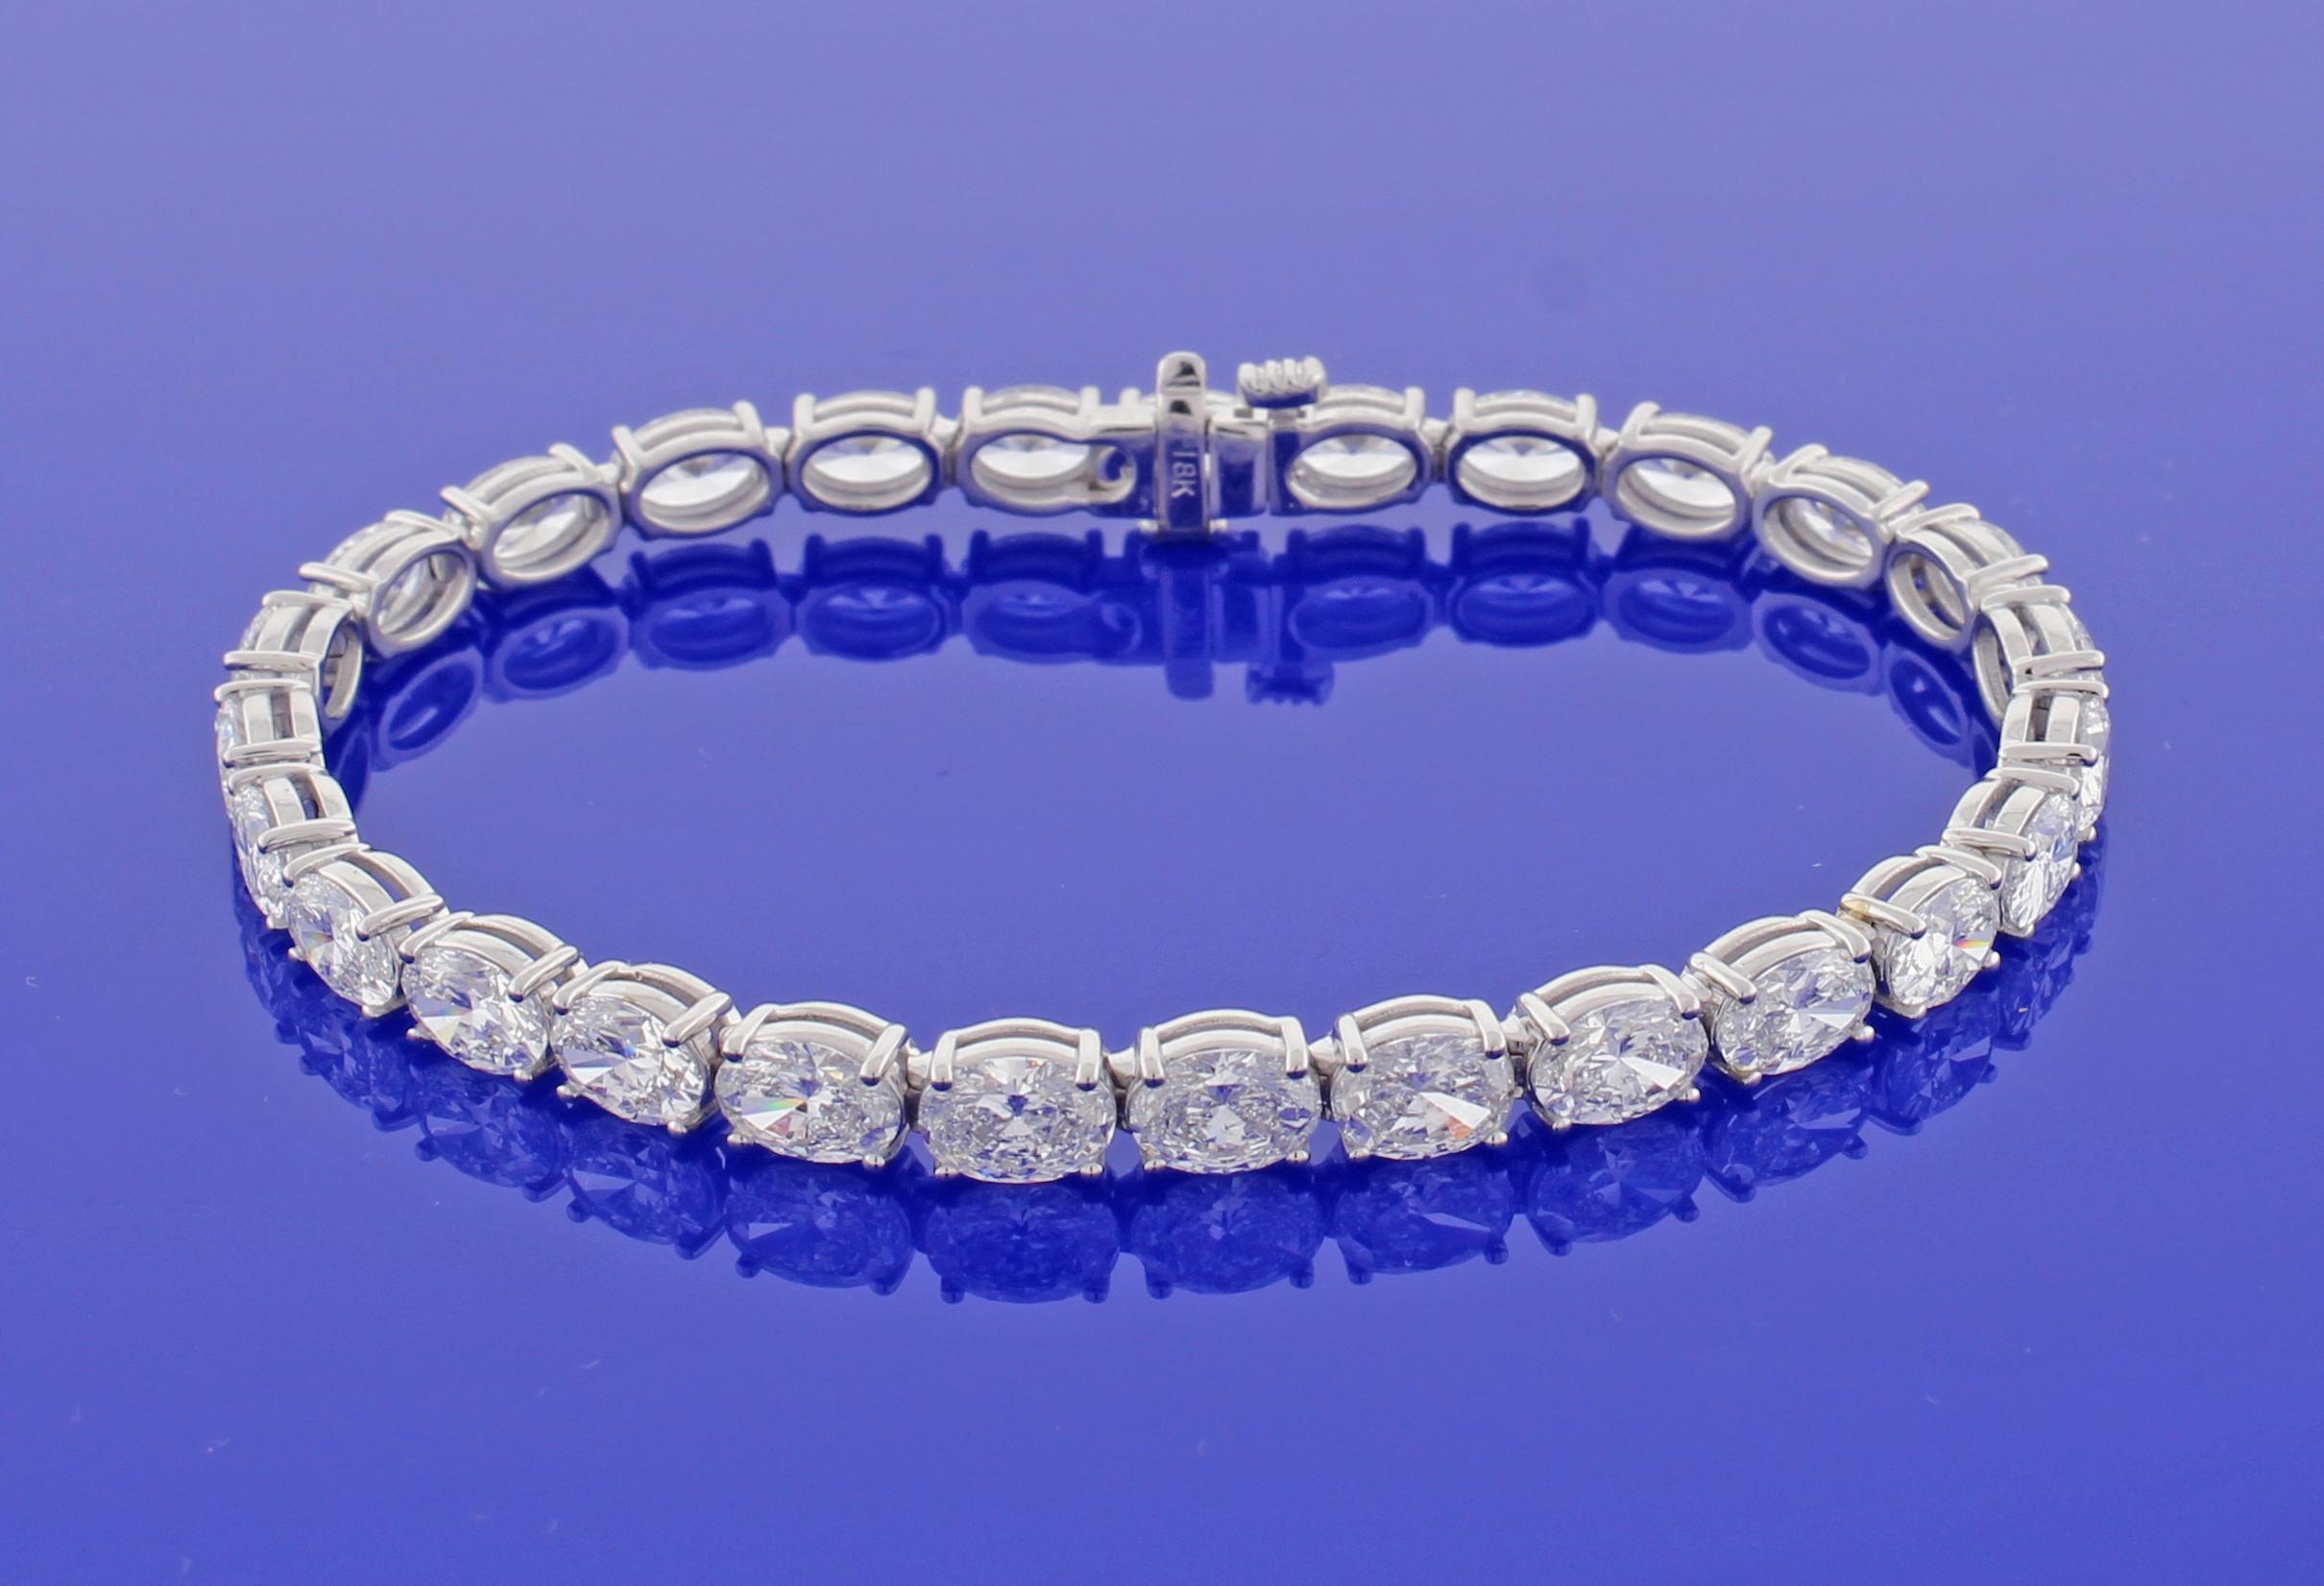 From Pampillonia jewelers, 27 perfectly matched oval diamonds lined up end to end form a straight line of diamonds. The 27 diamonds  weigh 11.50 carats  and are E-F color and are VS2+ clarity, set in 18 karat white gold. The bracelet is 6 ¾ inches